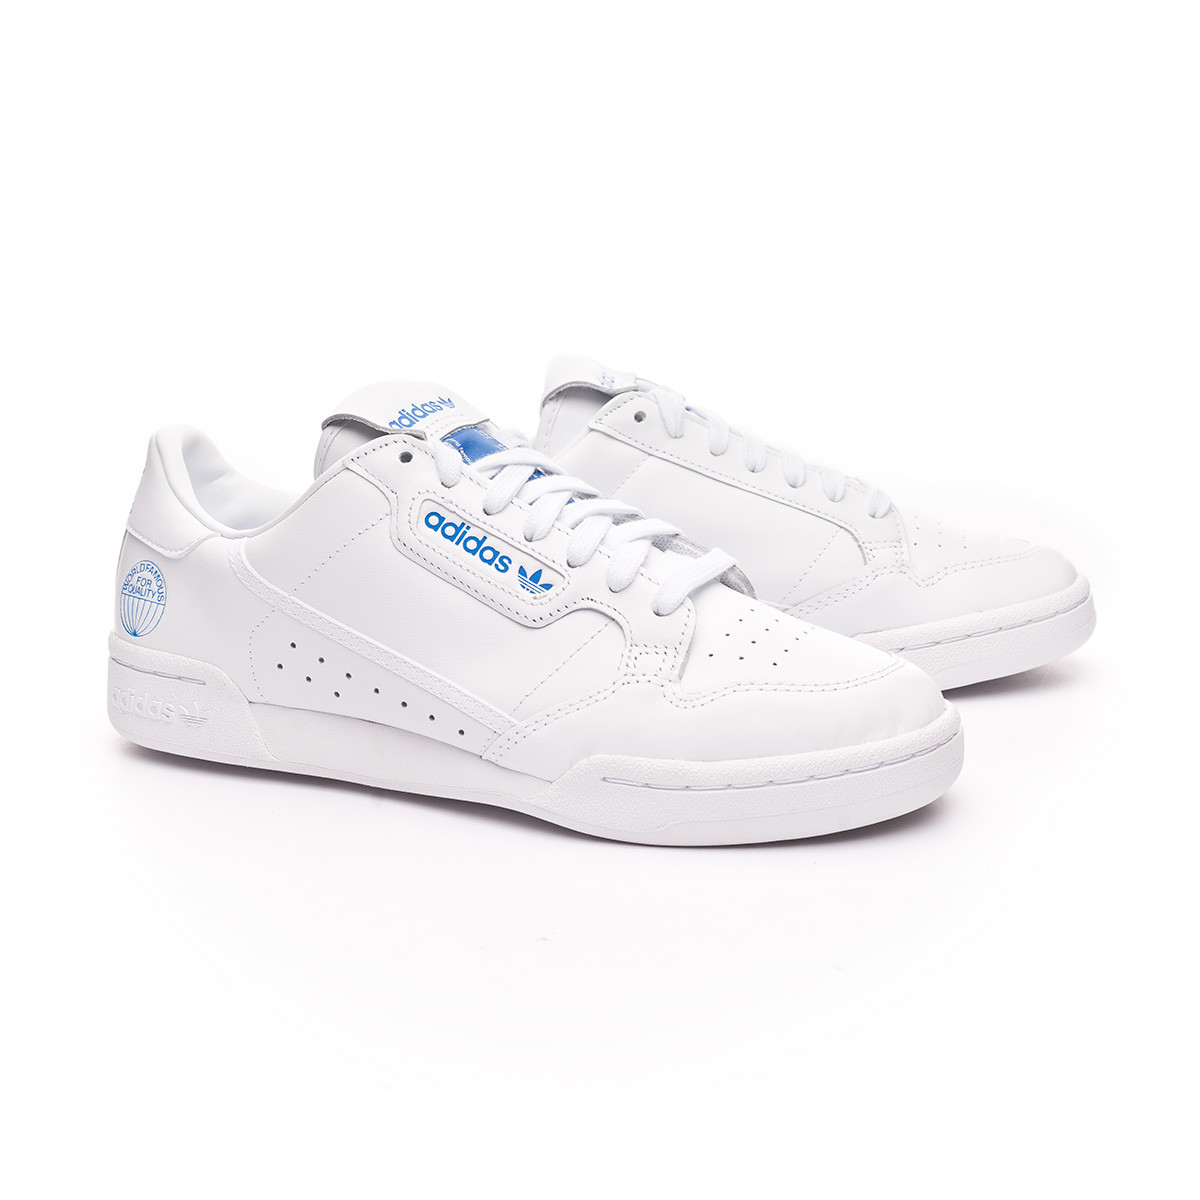 adidas continental 80 white and blue